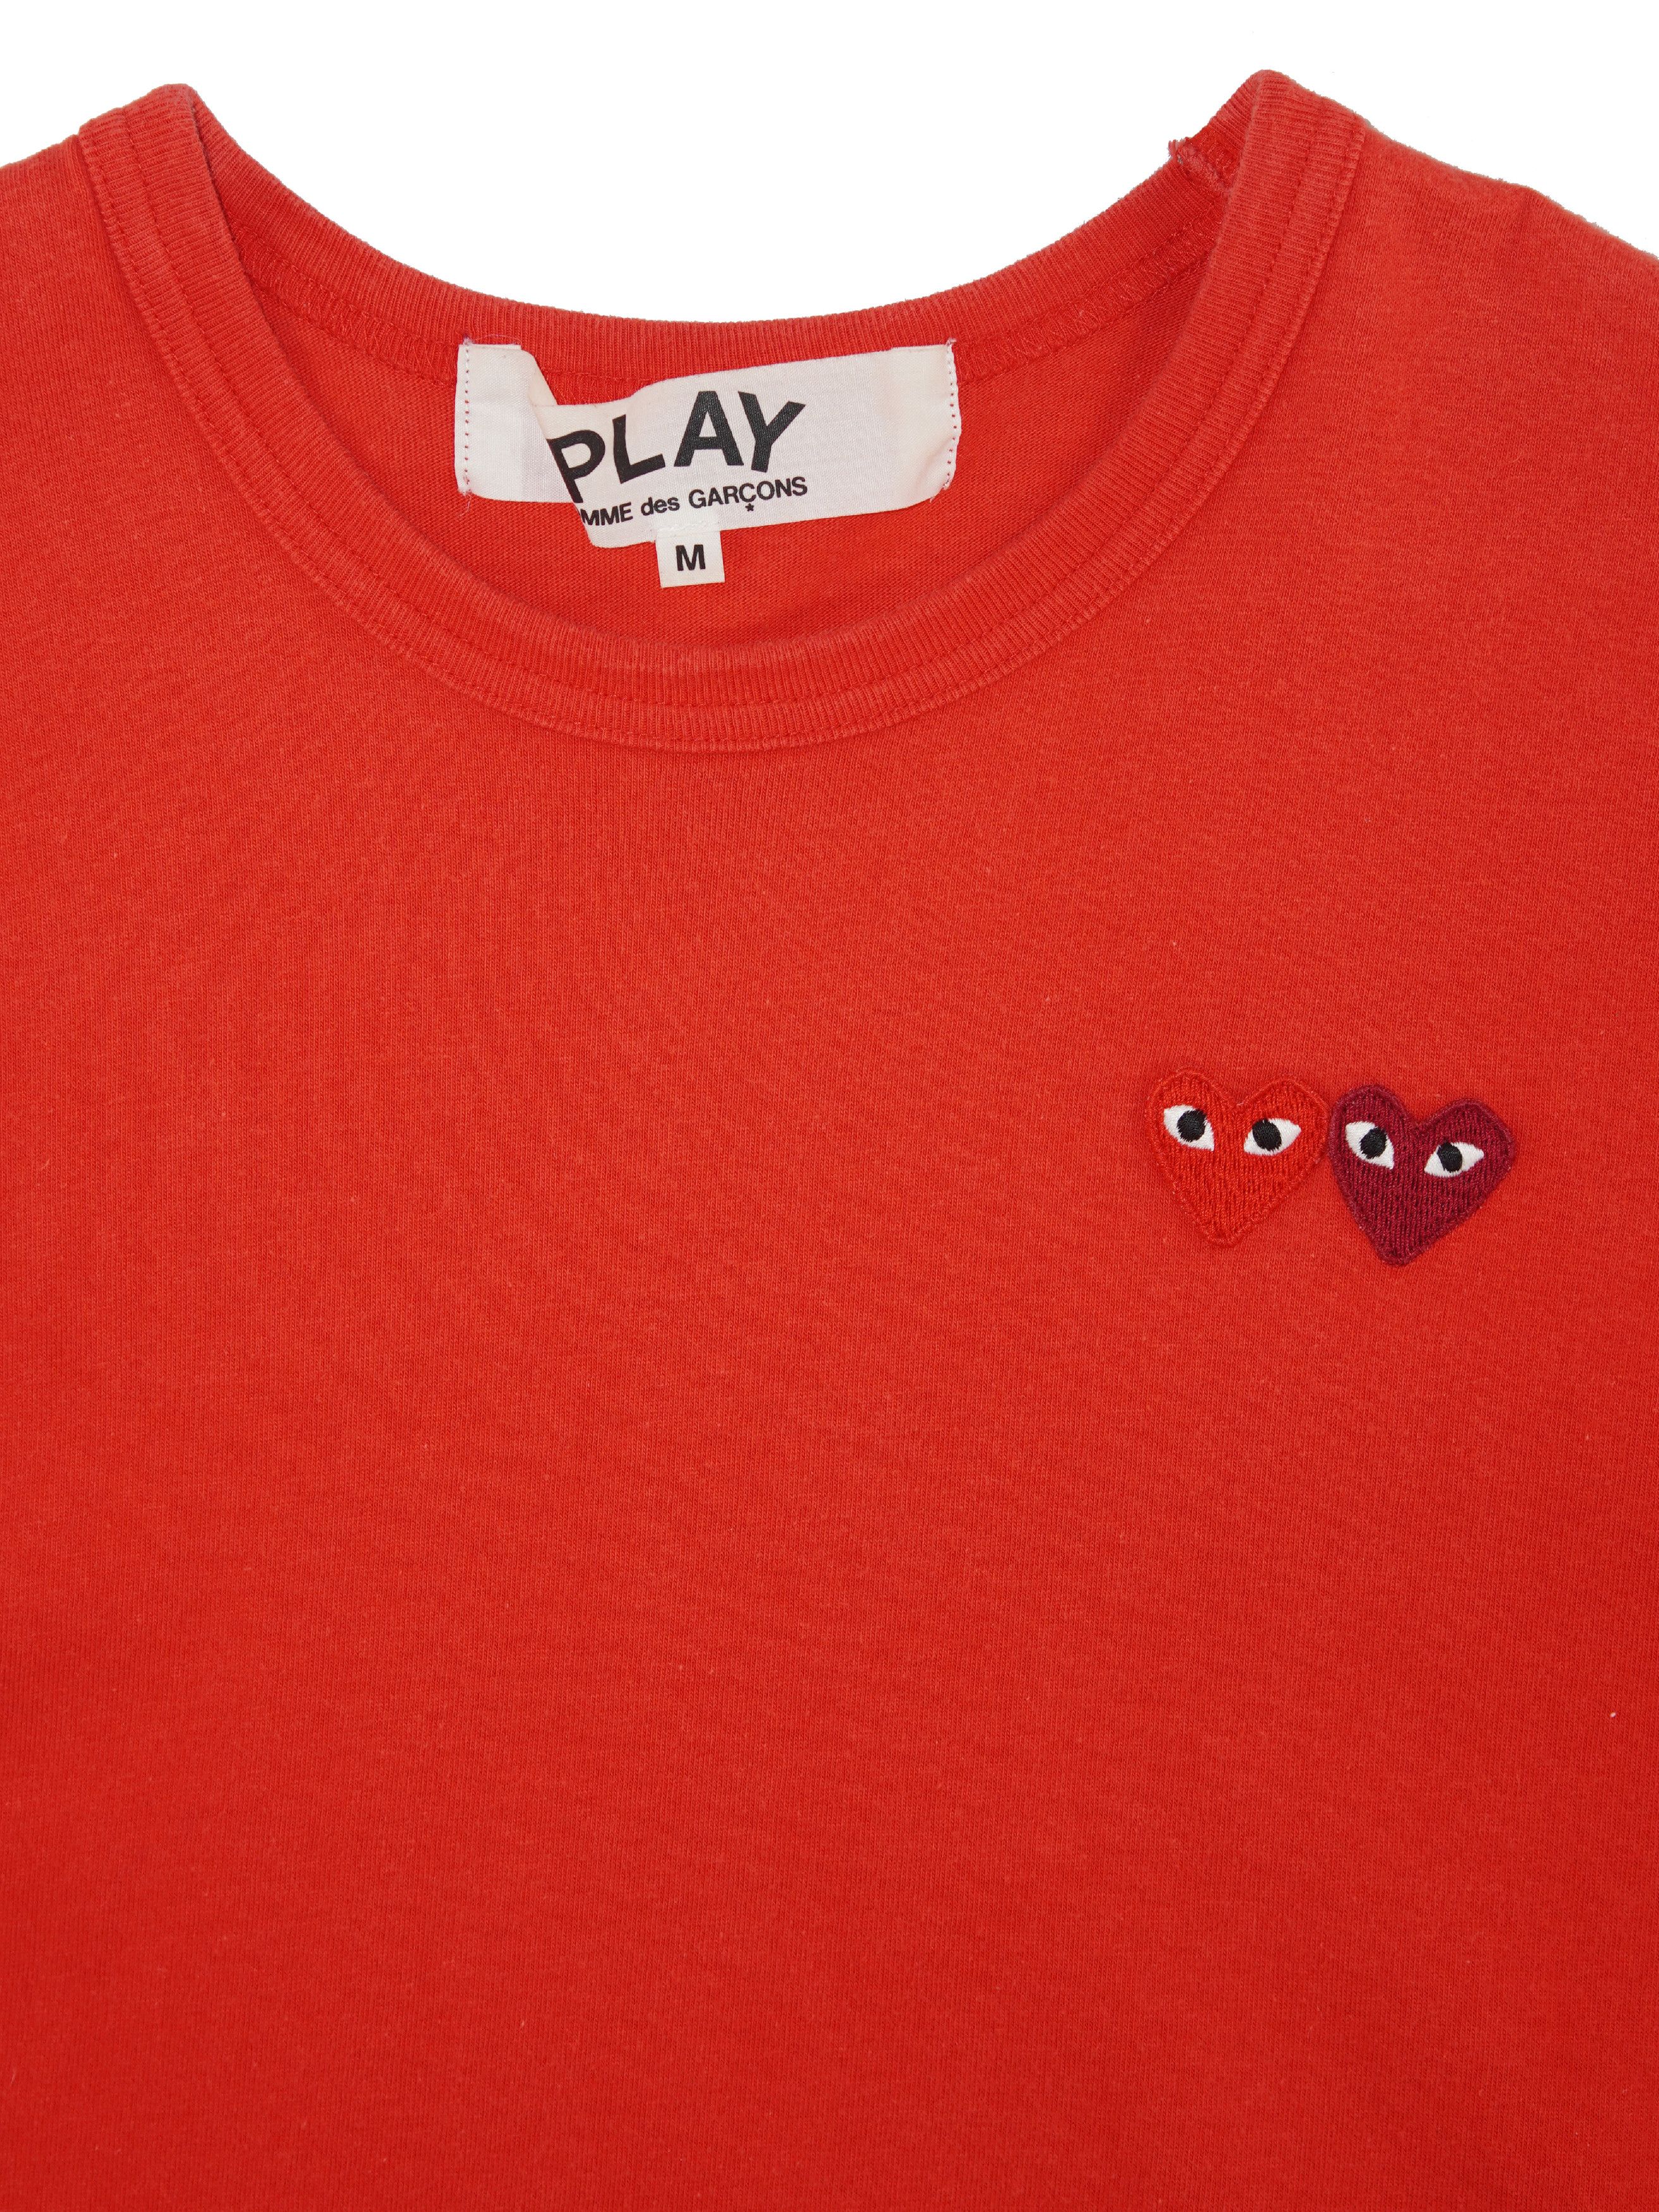 Comme des Garcons ❤️ CDG PLAY Double Heart Tee Red Size US M / EU 48-50 / 2 - 2 Preview